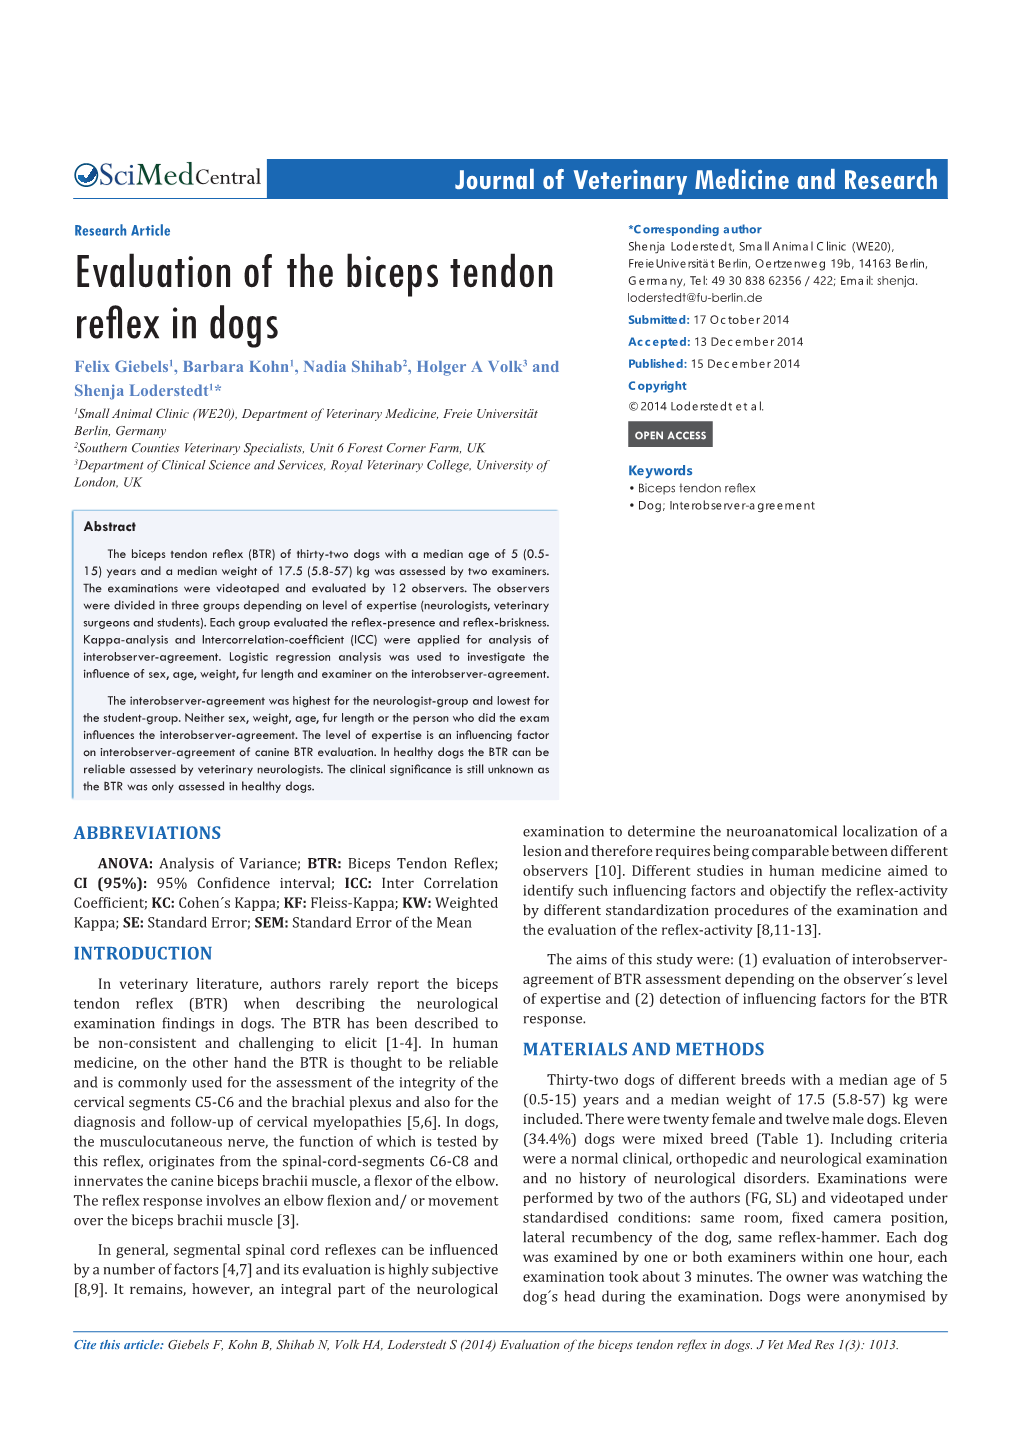 Evaluation of the Biceps Tendon Reflex in Dogs